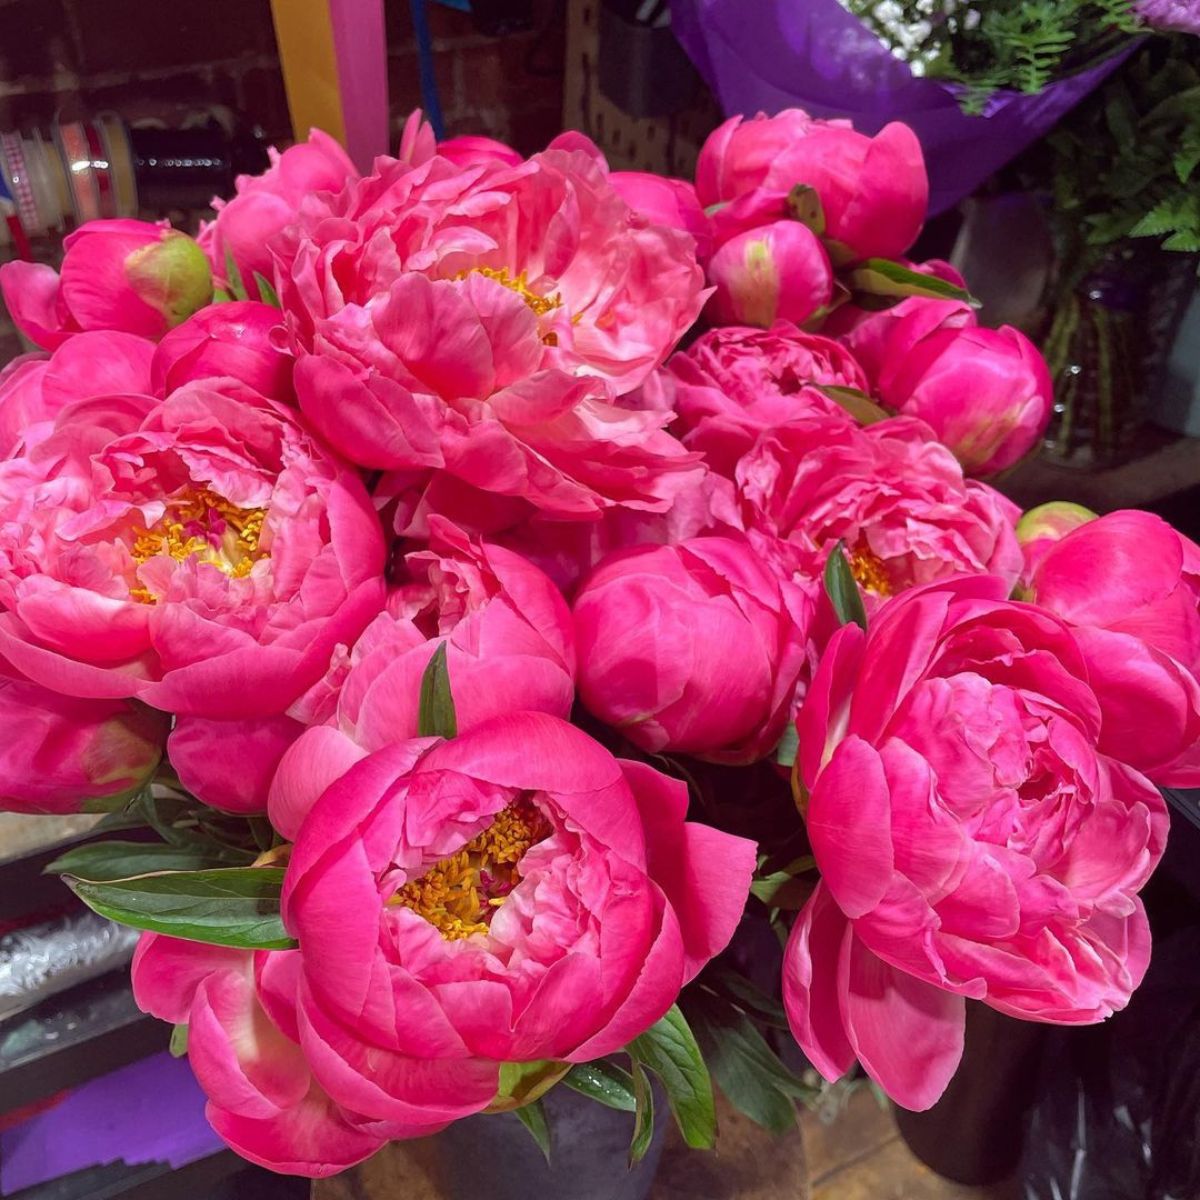 Peonies from Chile